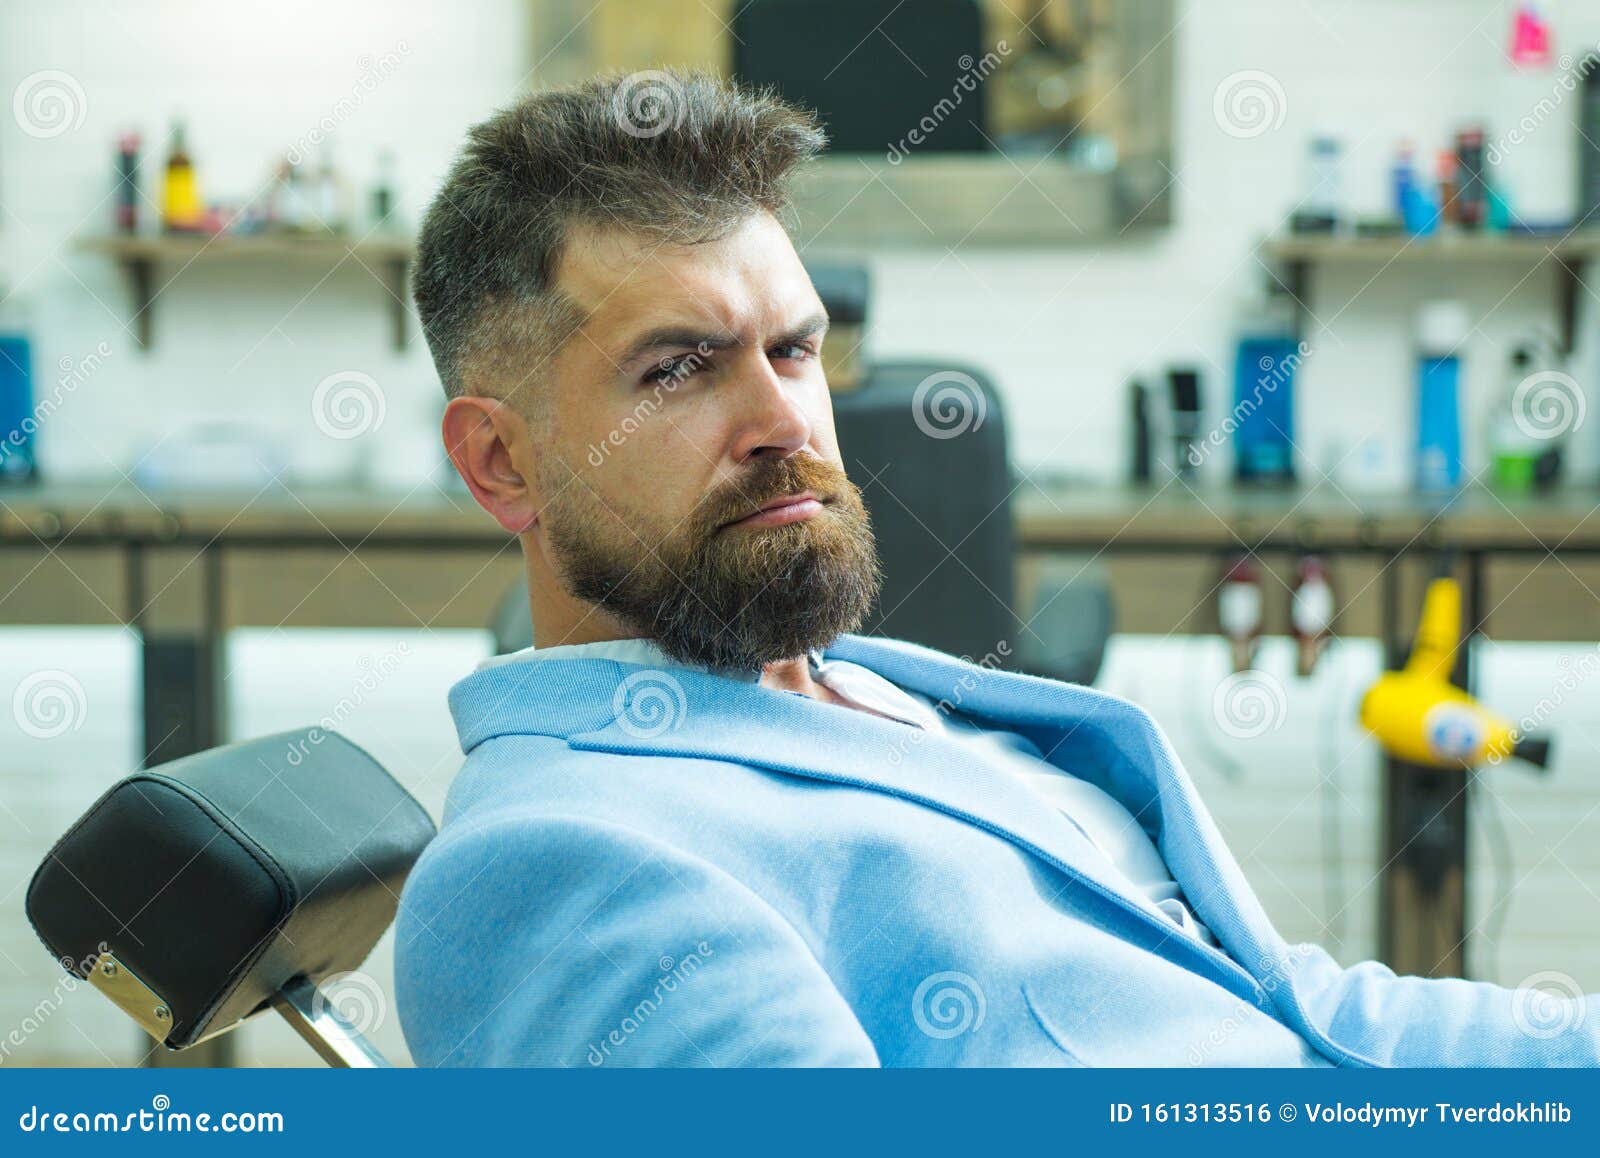 Hair Salon and Barber Vintage. Beard Styling Cut. Portrait Bearded Man. Hair  Style and Hair Stylist Stock Photo - Image of hairdresse, scissors:  161313516